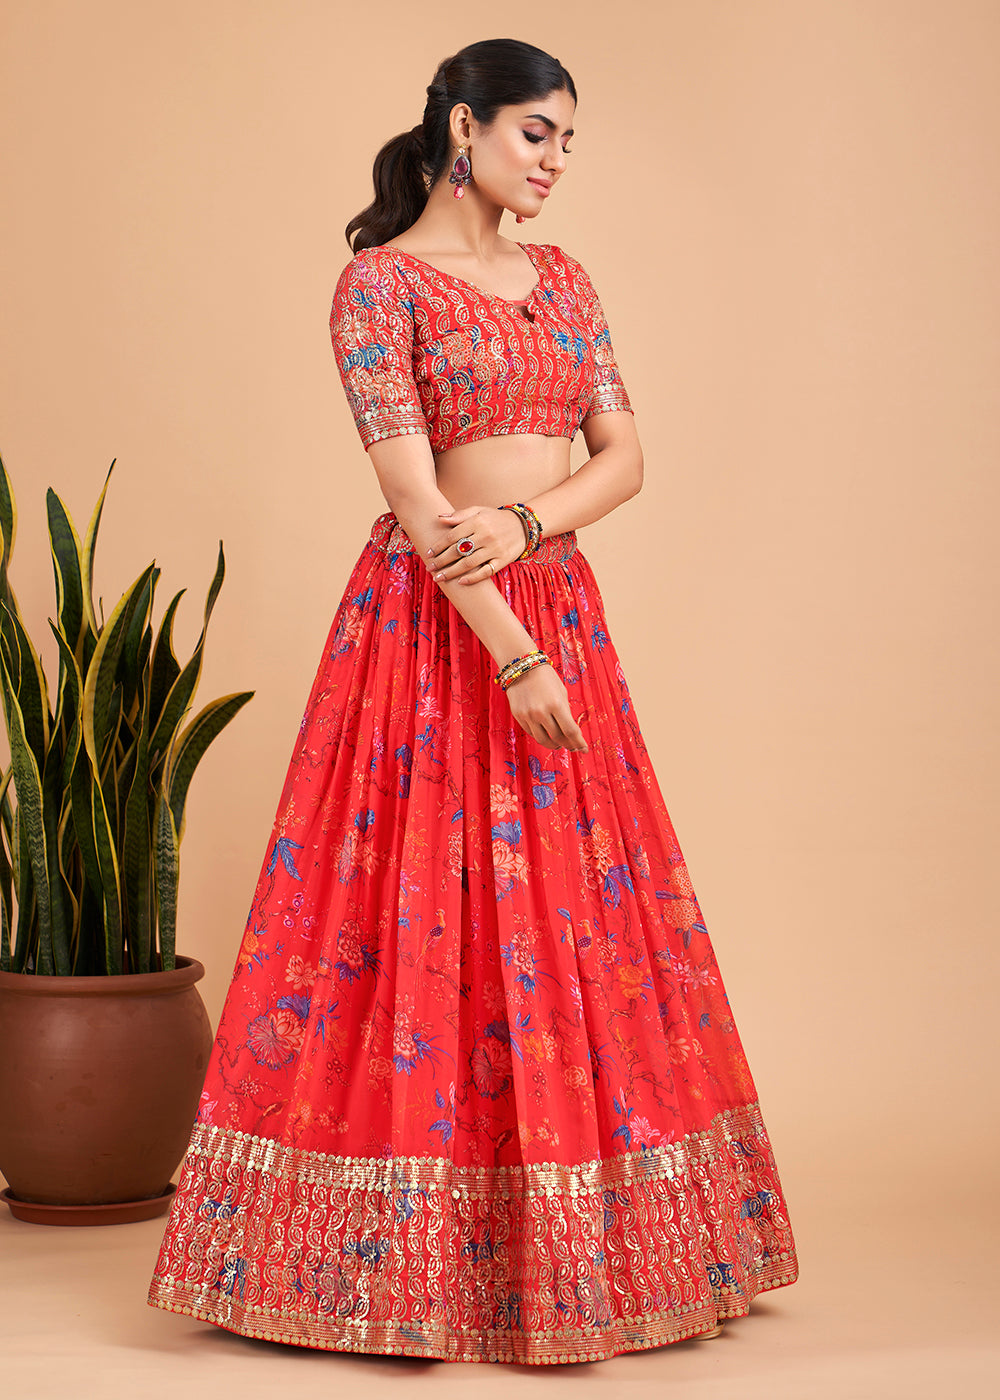 Buy Now Captivating Bright Red Floral Printed Georgette Lehenga Choli Online in USA, UK, Canada & Worldwide at Empress Clothing. 